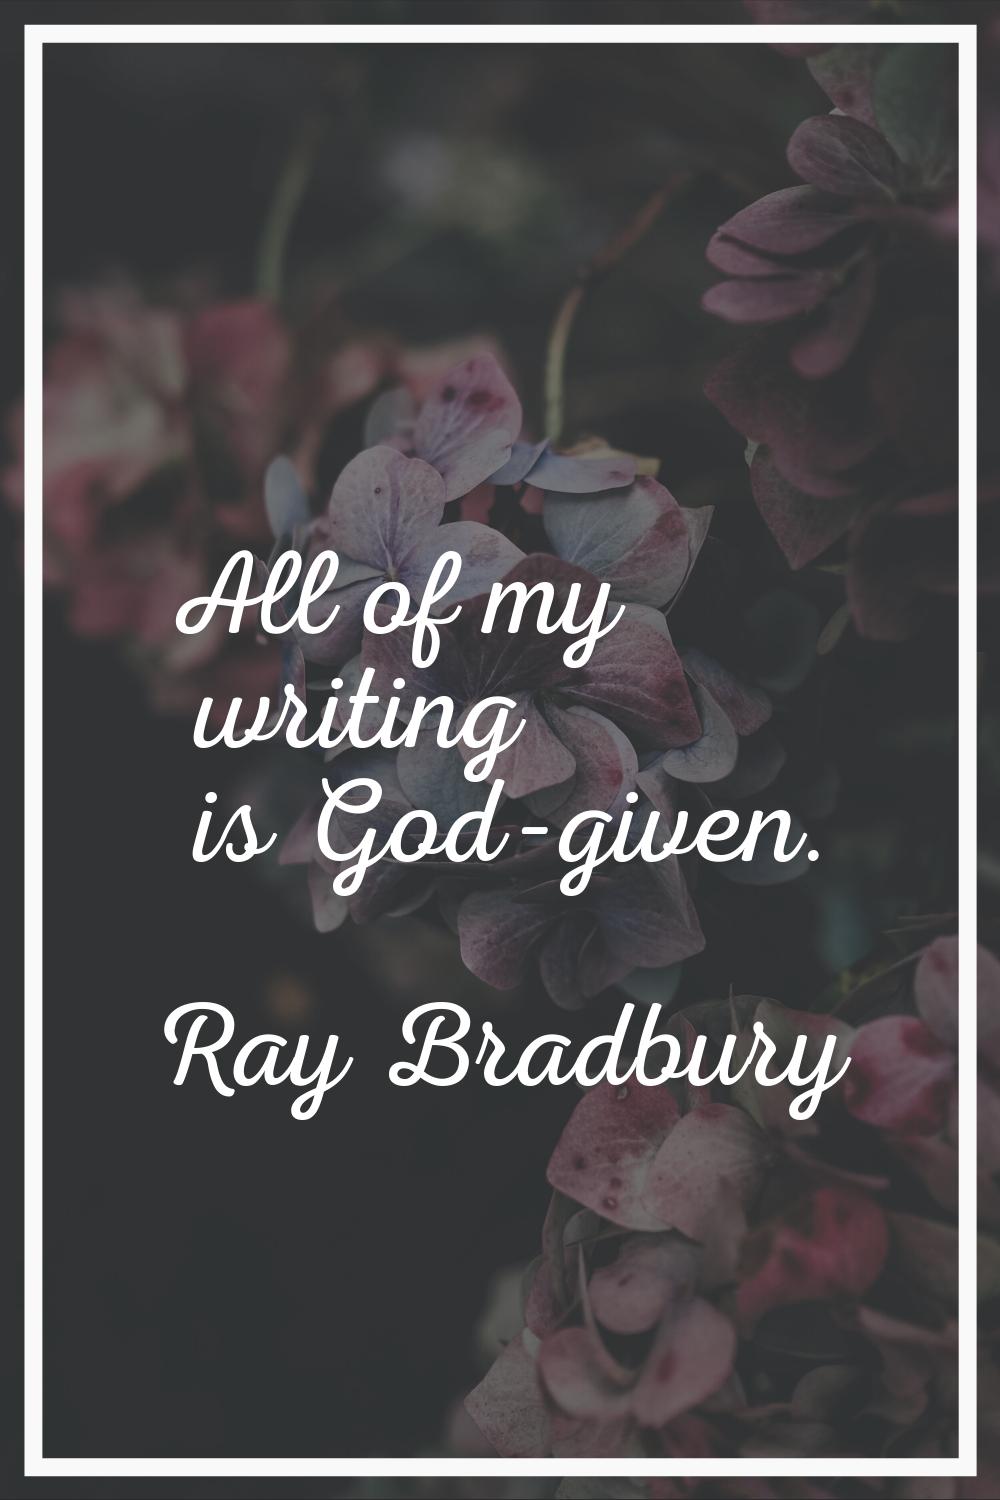 All of my writing is God-given.